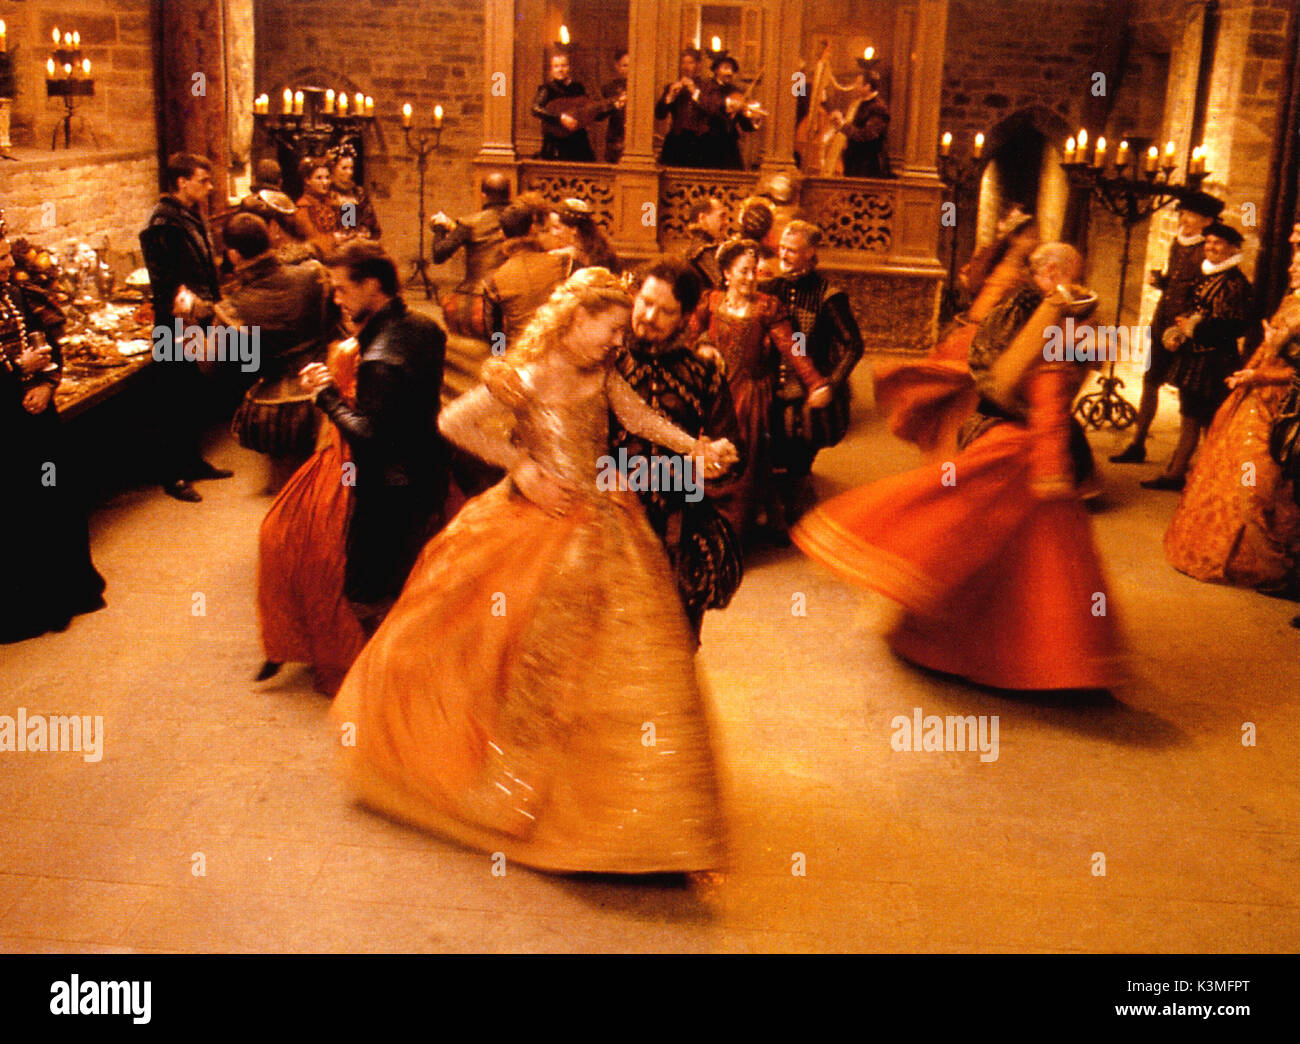 SHAKESPEARE IN LOVE [US / BR 1998] JOSEPH FIENNES, GWYNETH PALTROW, COLIN FIRTH     Date: 1998 Stock Photo